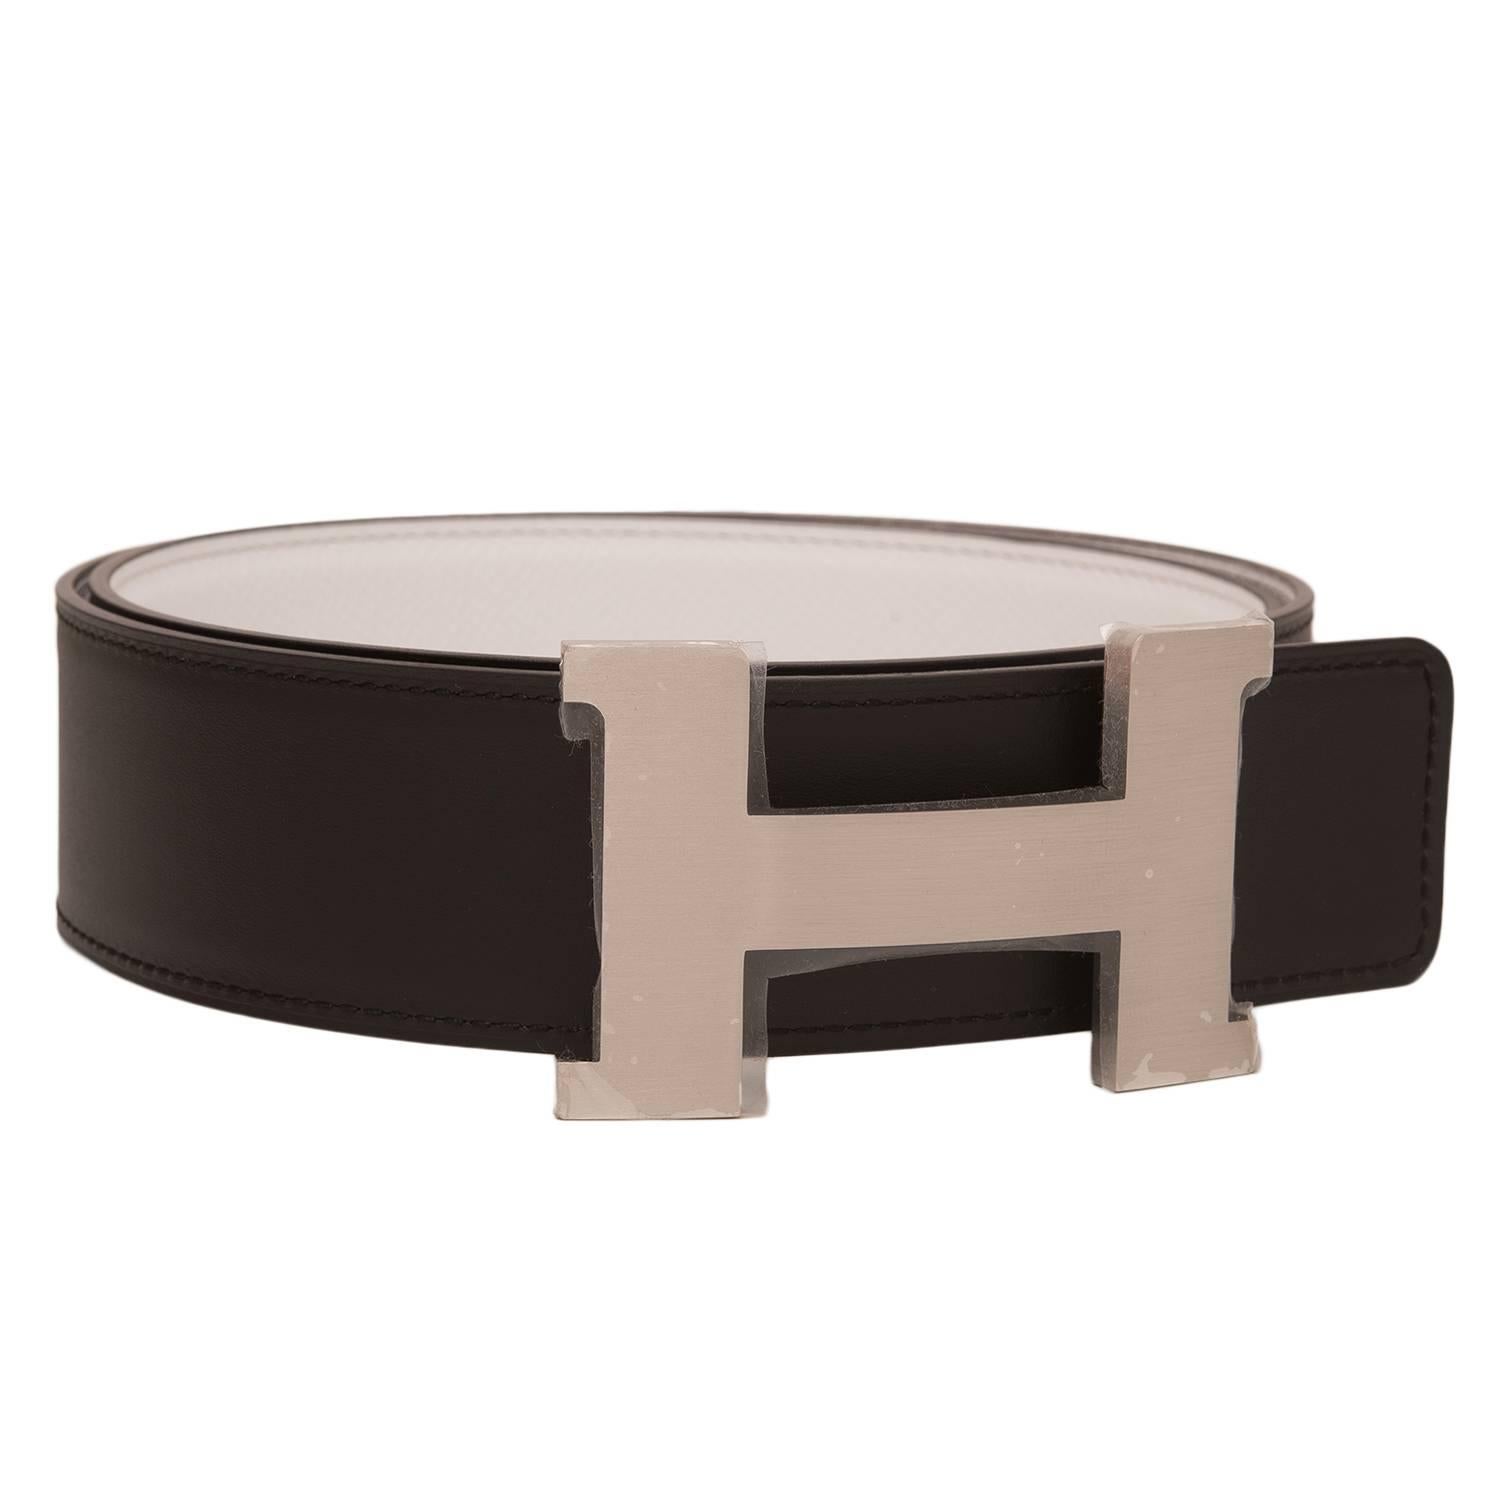 Hermes belt kit comprising an adjustable wide 42mm Constance H belt of white epsom with tonal stitching reversing to black calfskin and accompanied by a removable brushed silver H buckle.

Origin: France

Condition: Pristine, never